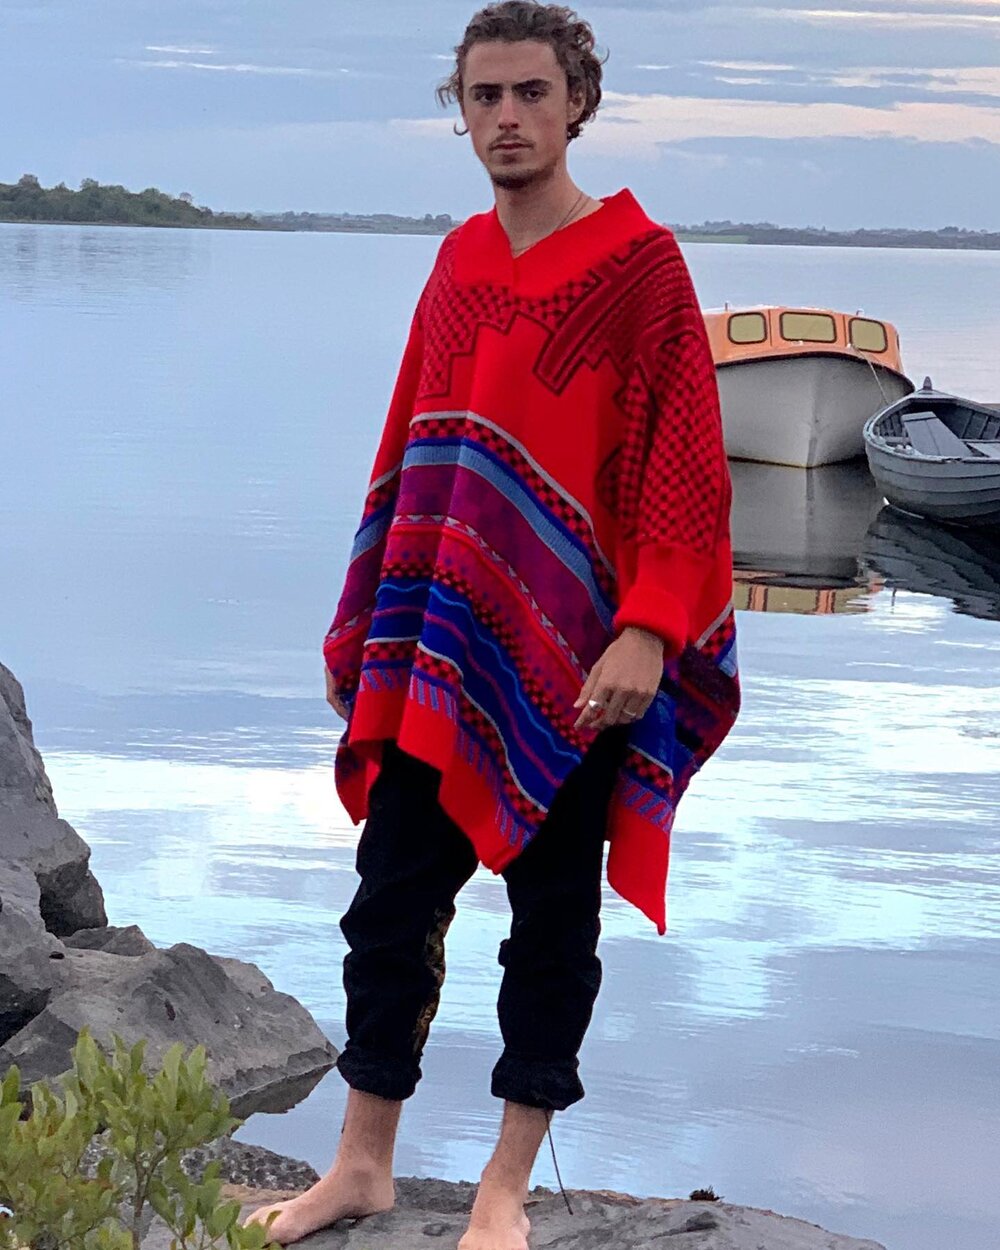 Introducing our KOKORO X ANZ Ponchos ❤️❤️❤️ #exclusive  @kokorolondon  In-store &amp; online - link in bio.  #limitededition #collaboration #madeintheuk  Model @finn.brabham #poncho #menswear